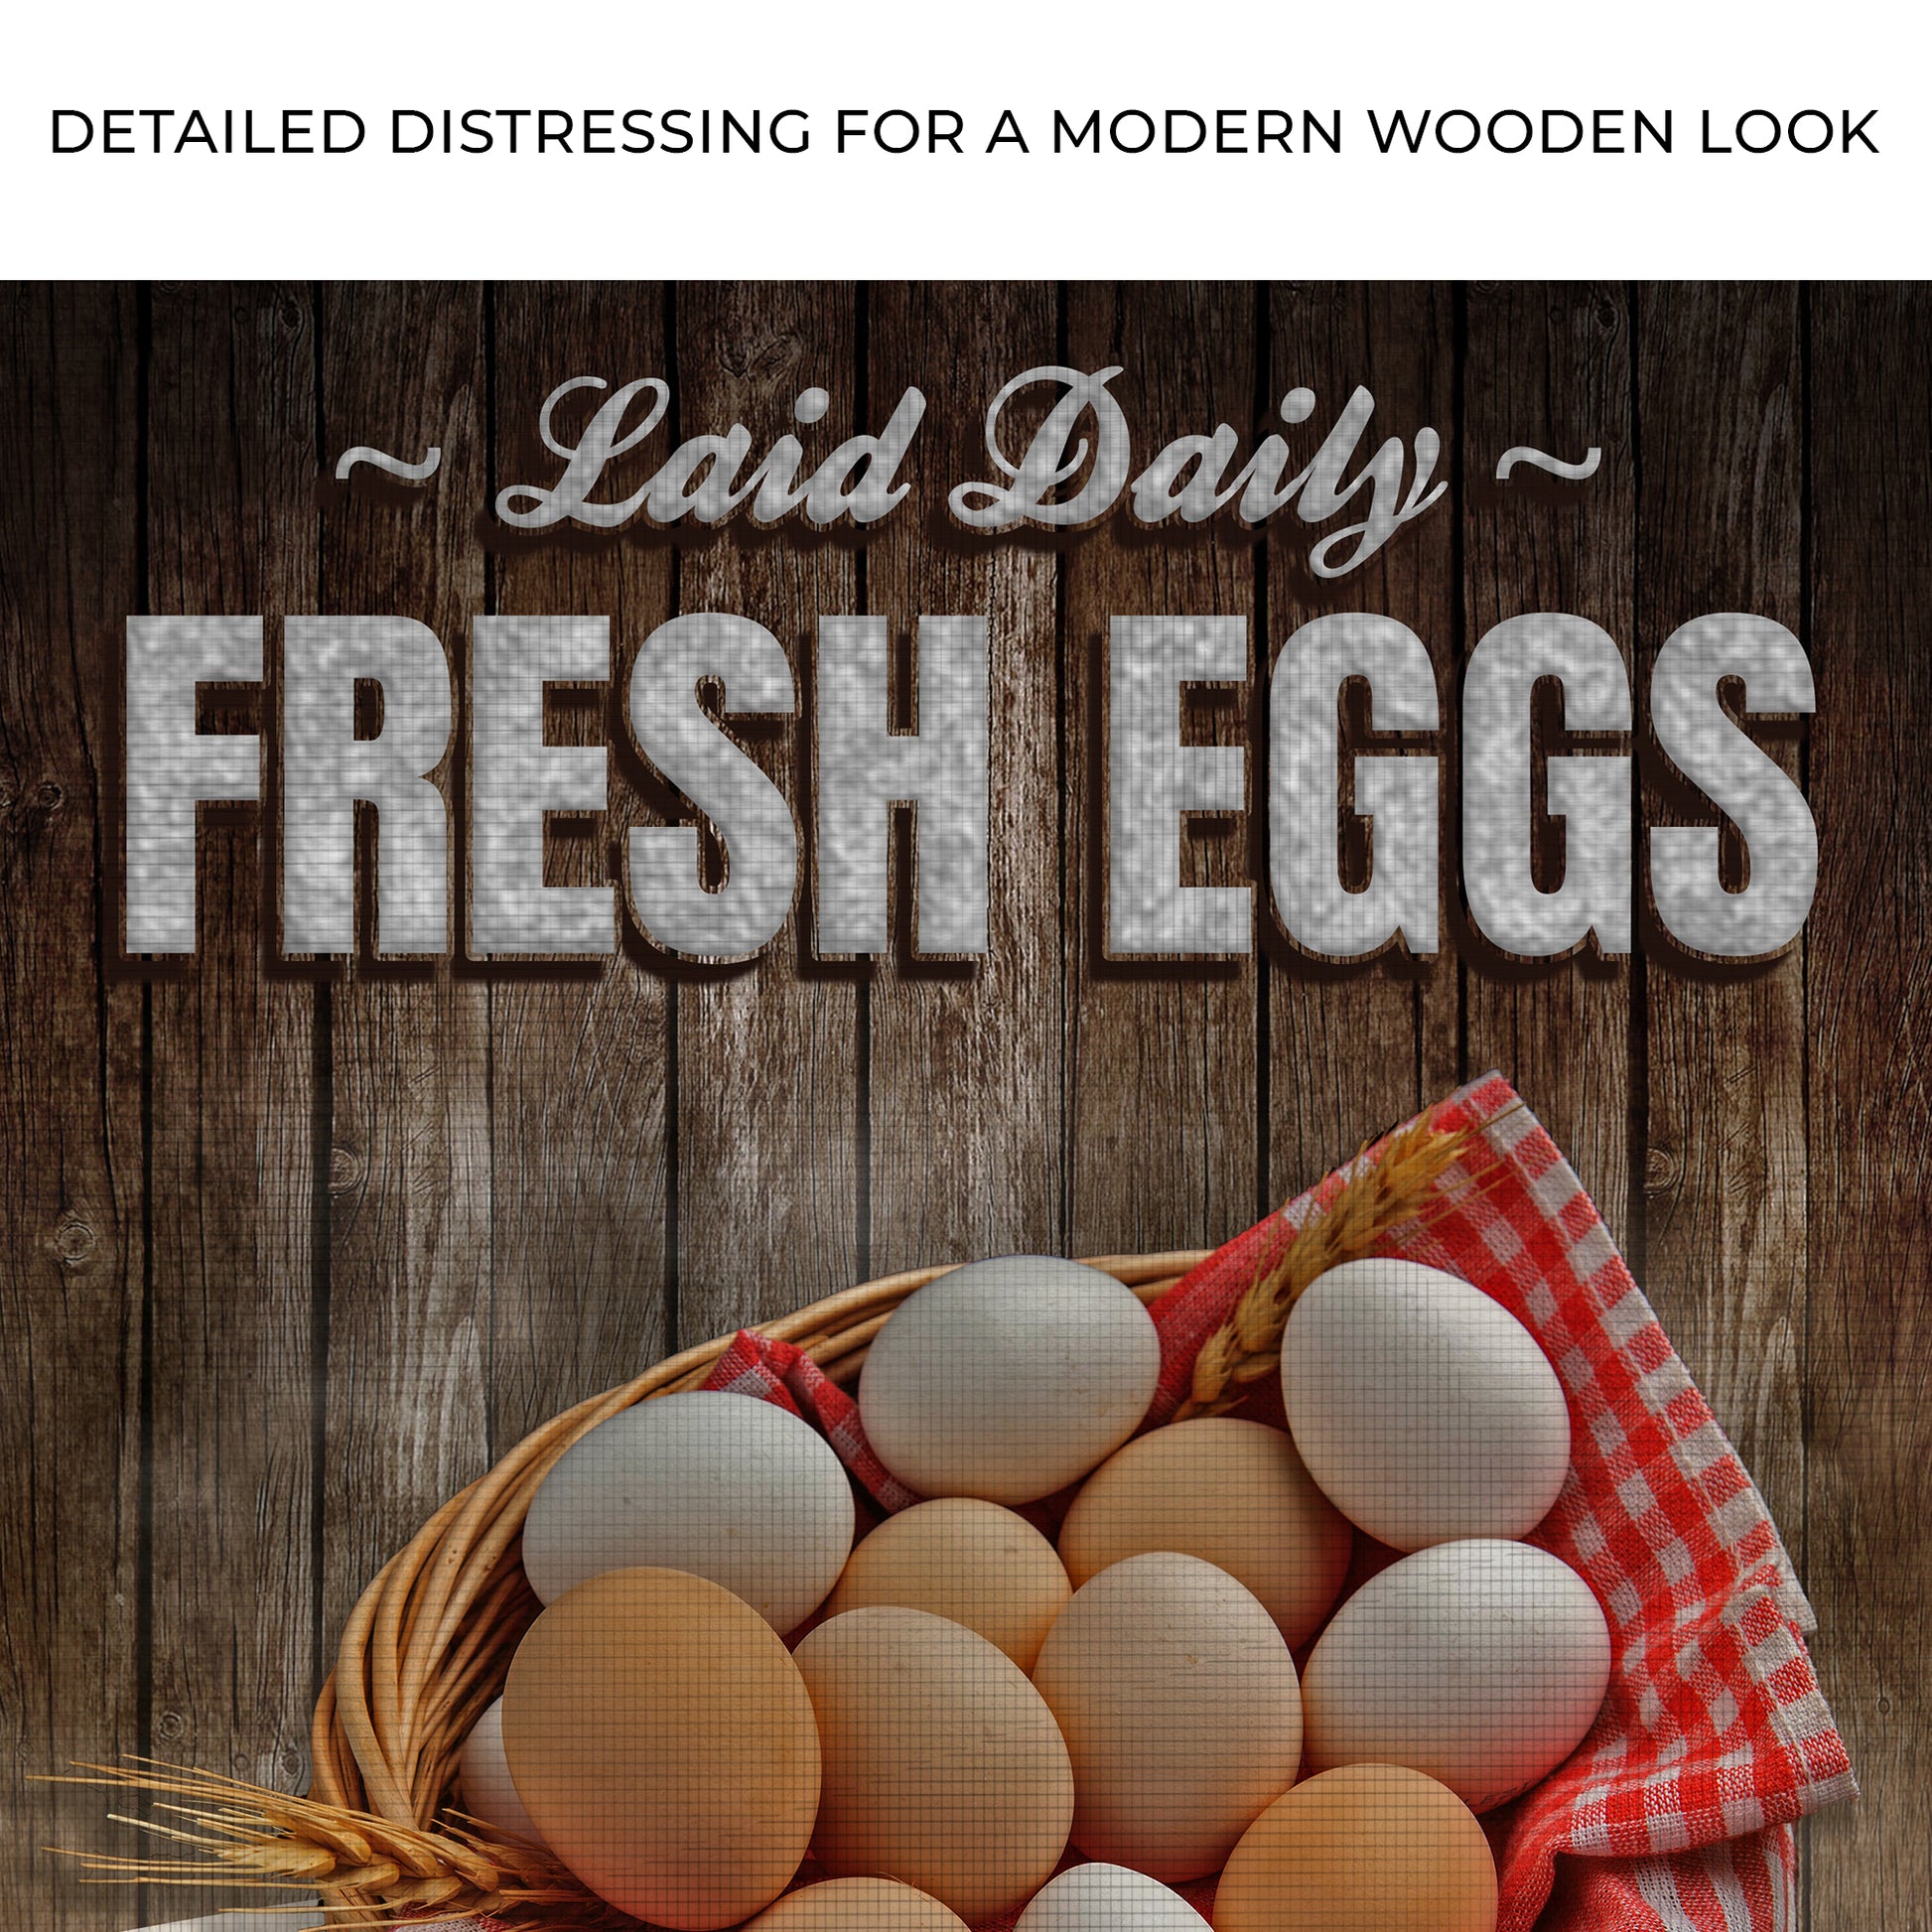 Sold Here Laid Daily Farm Fresh Eggs Sign Zoom - Image by Tailored Canvases